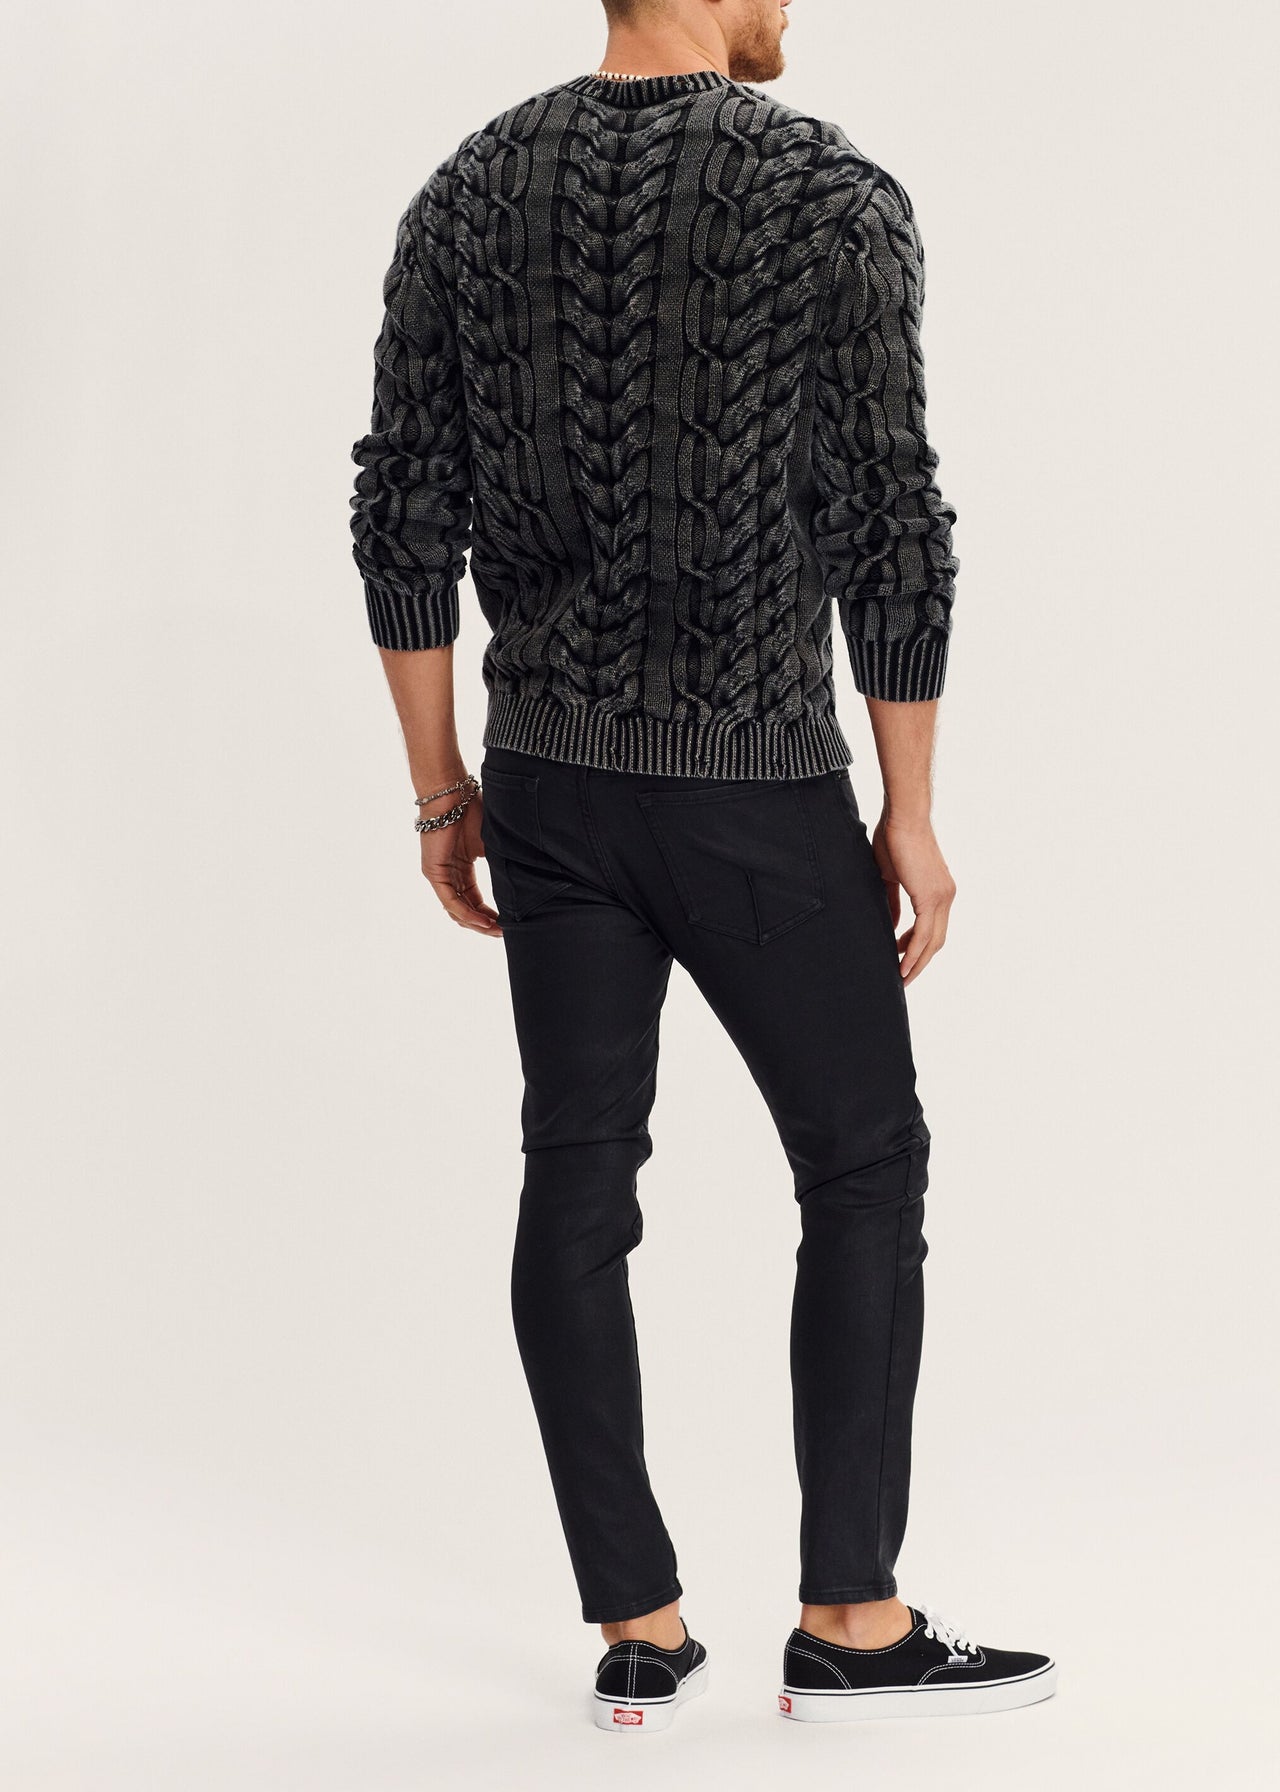 Lewis Cable Knit Sweater